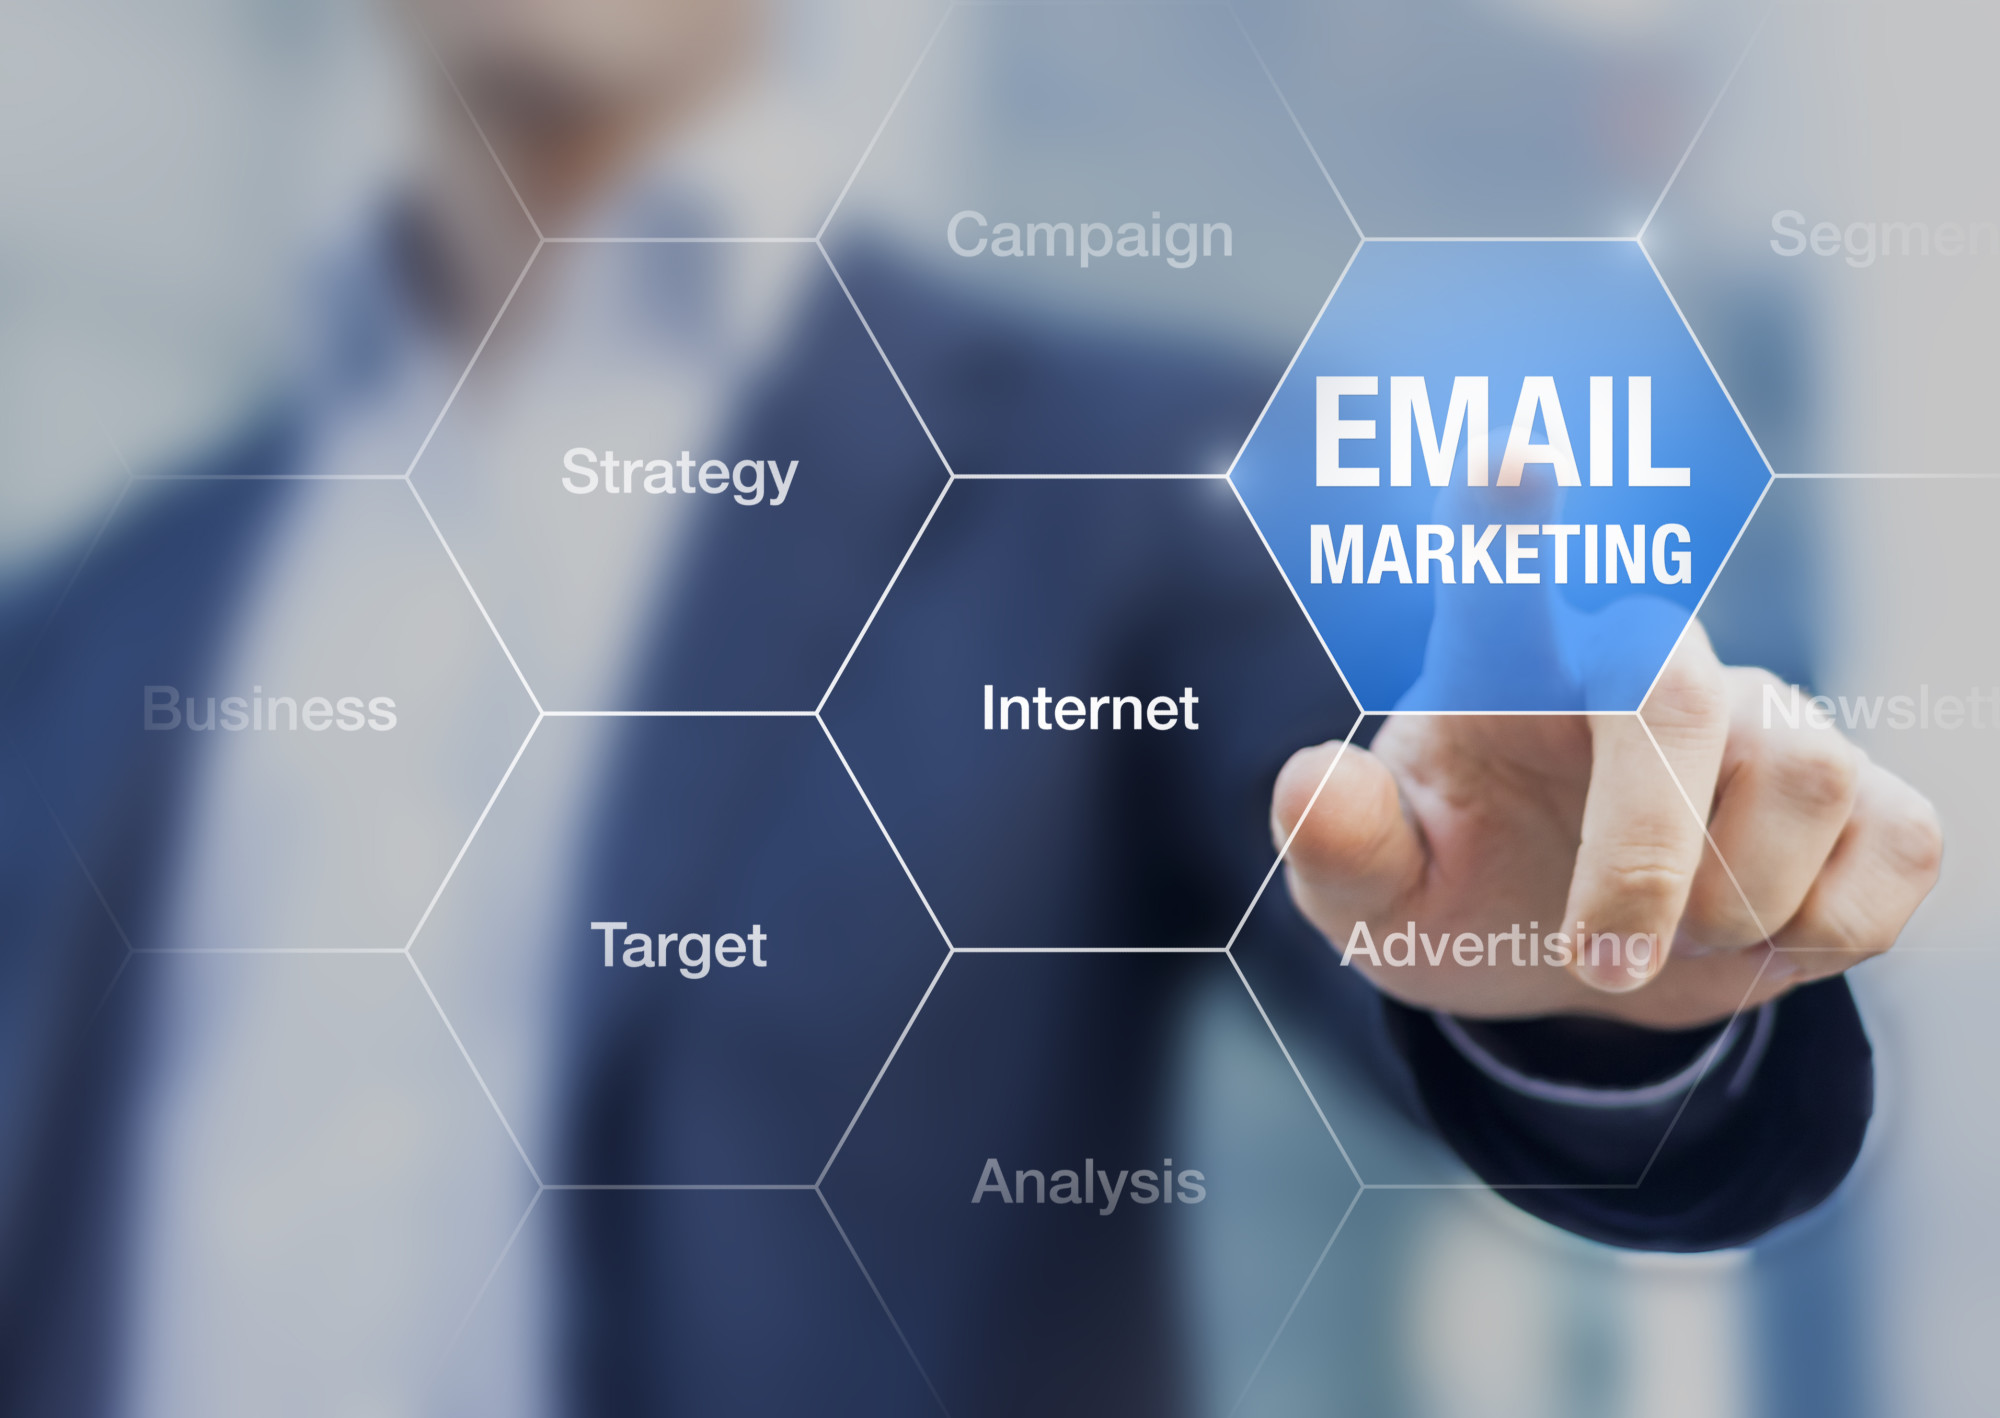 Email Marketing and related terms